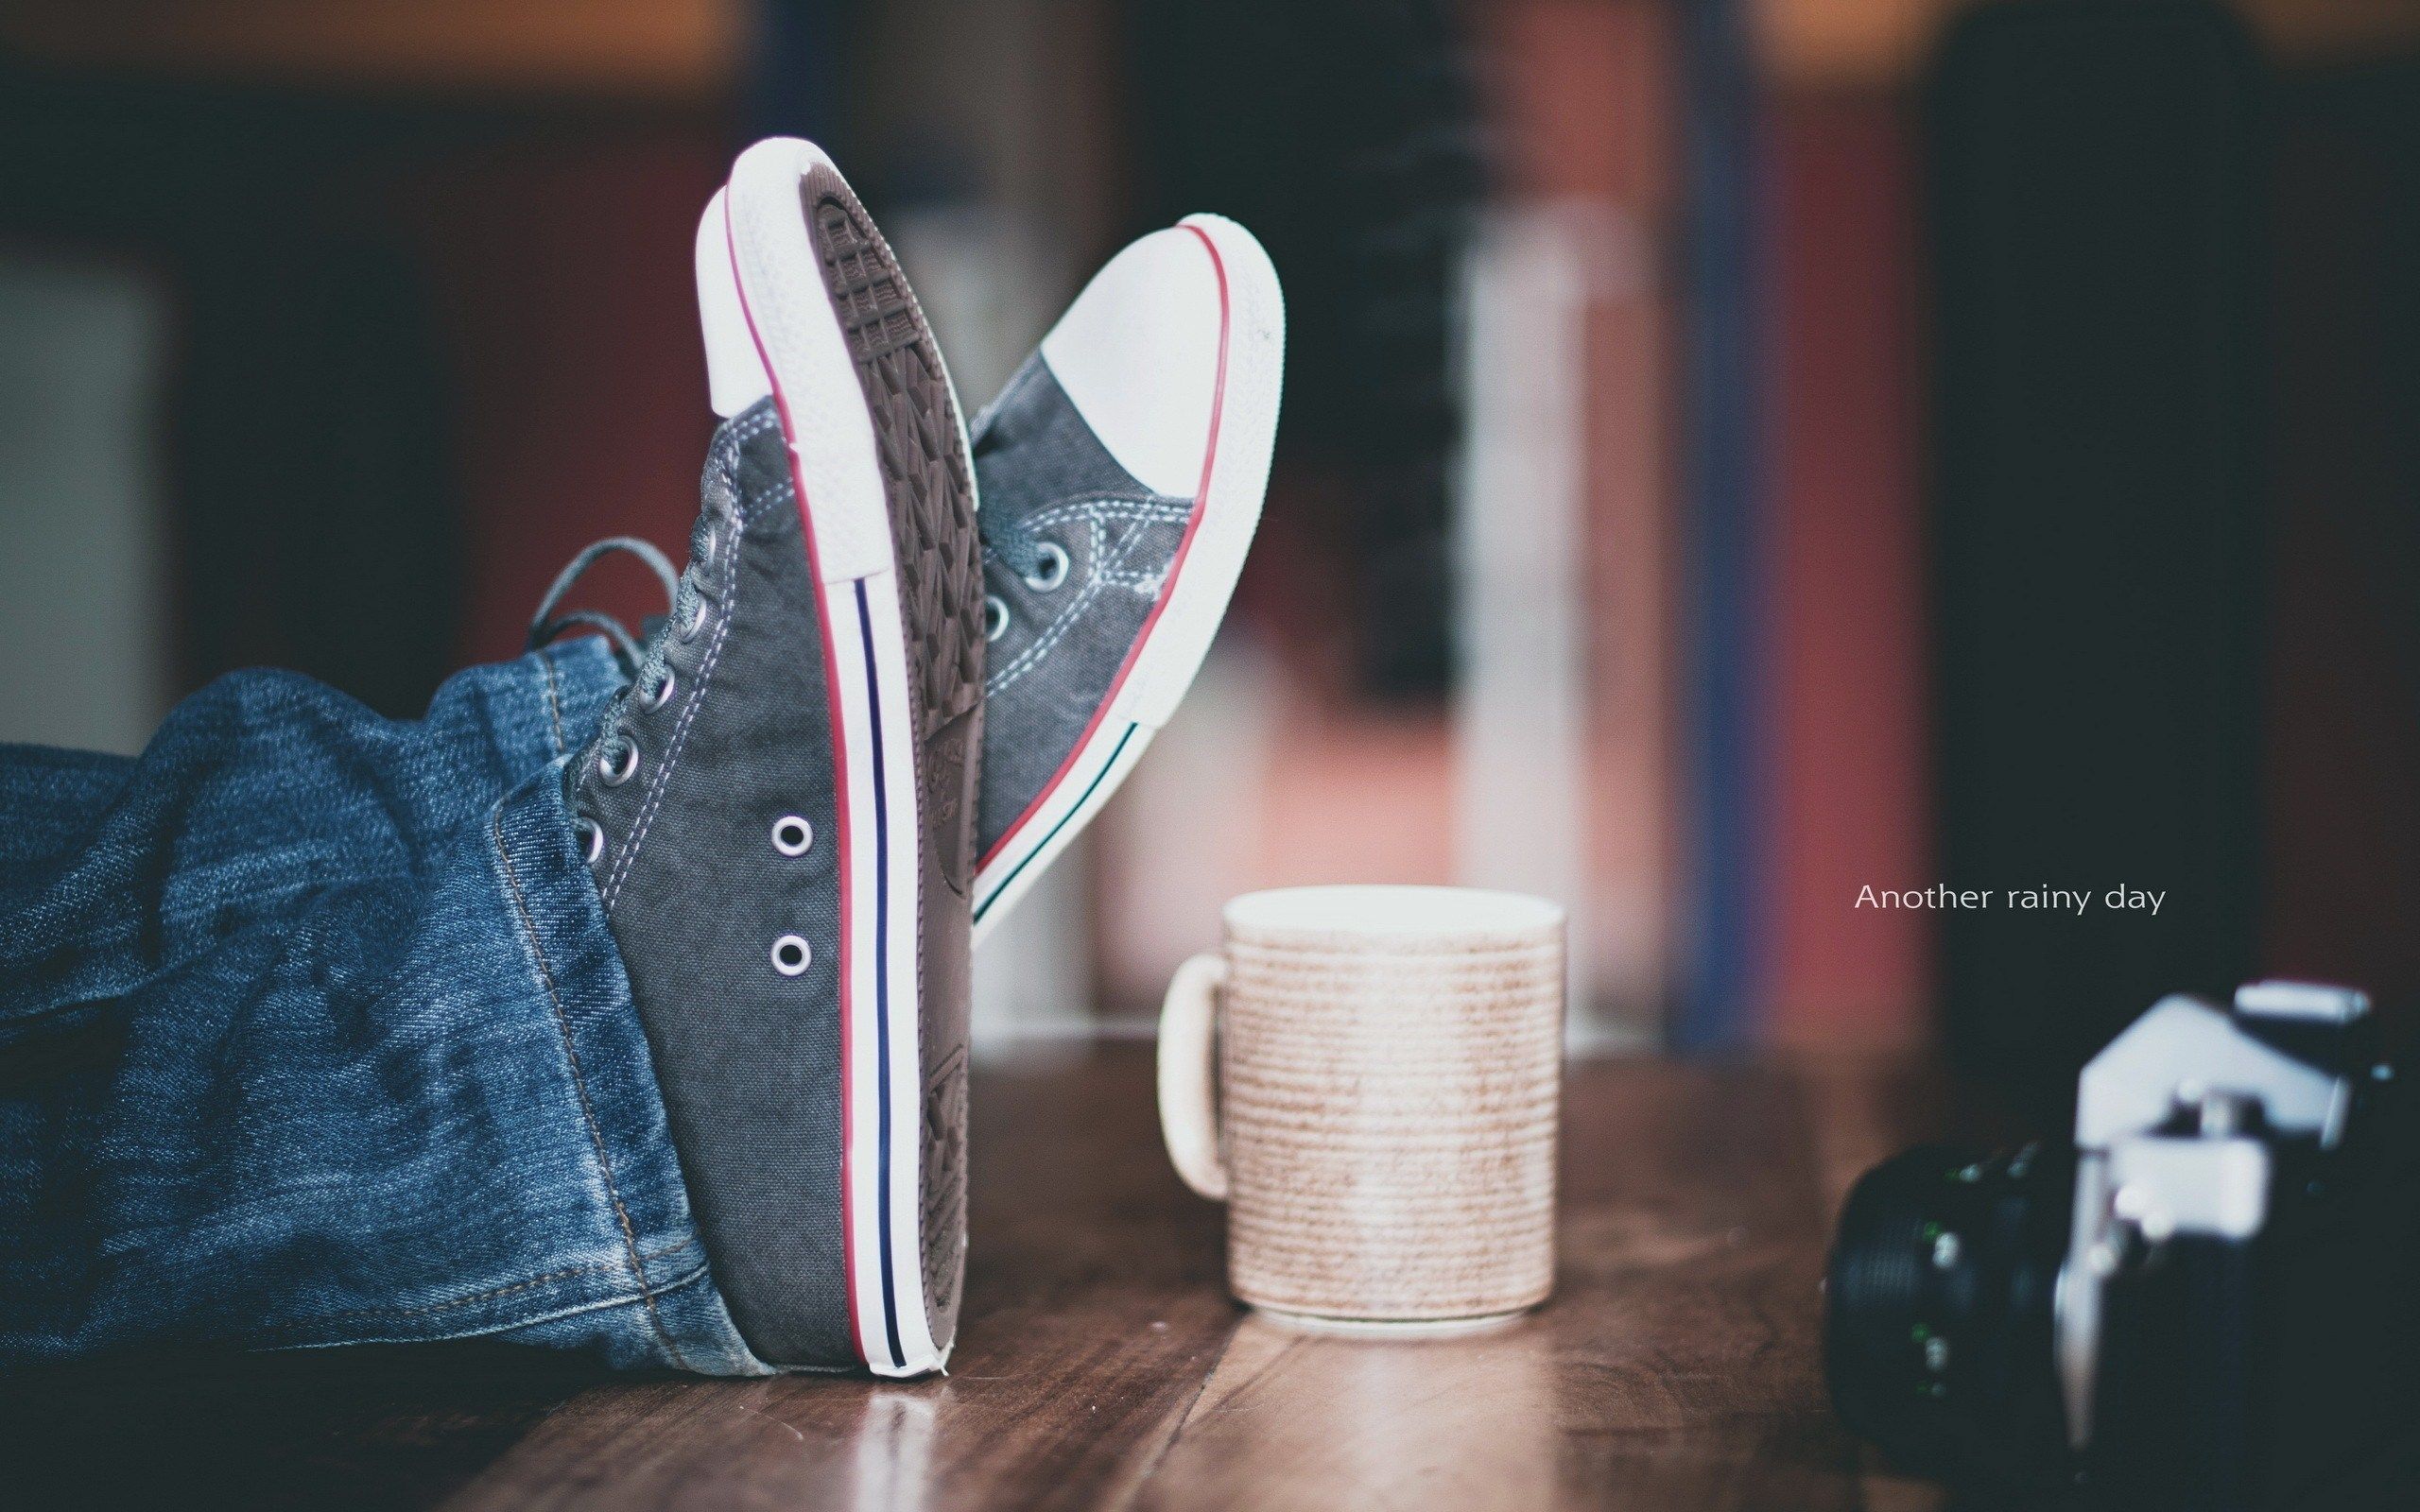 legs sneaker, another rainy day, cup, photography, jean, hd, wallpaper